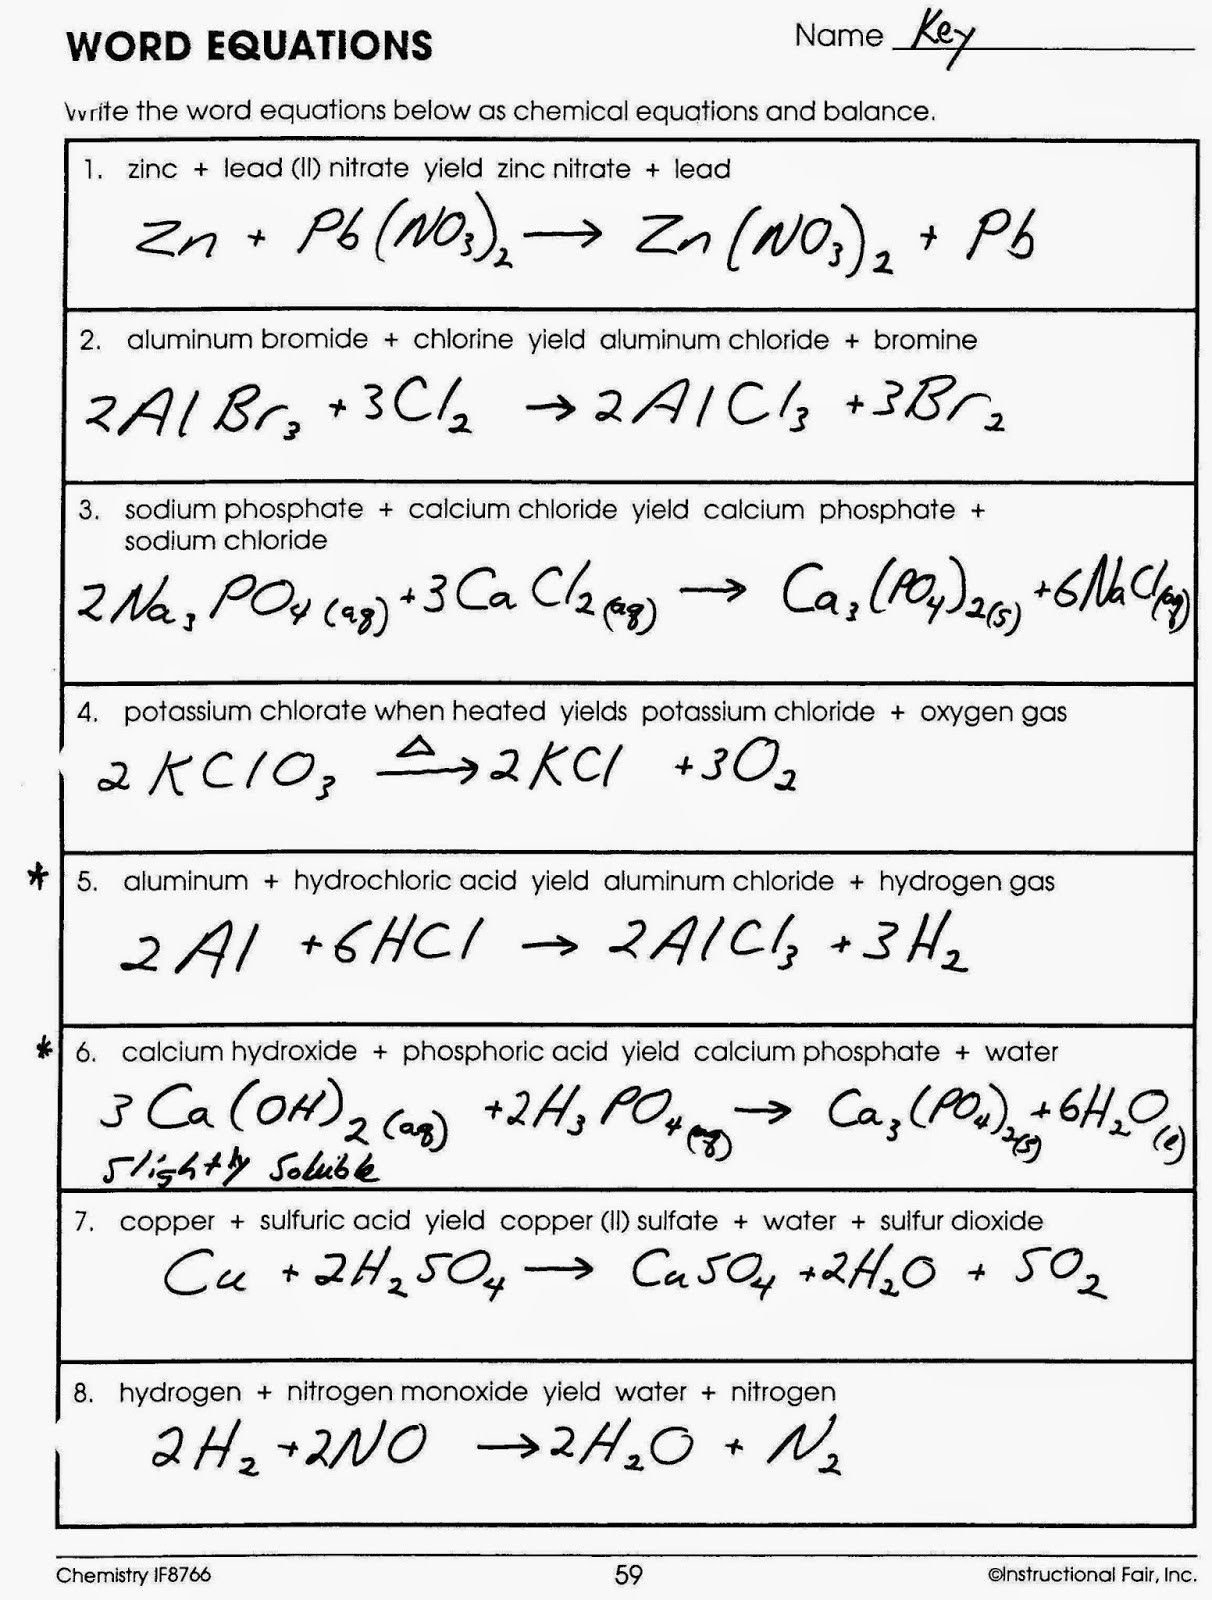 Balancing Chemical Equations Worksheet 1 Answers  Briefencounters As Well As Word Equations Worksheet Answers